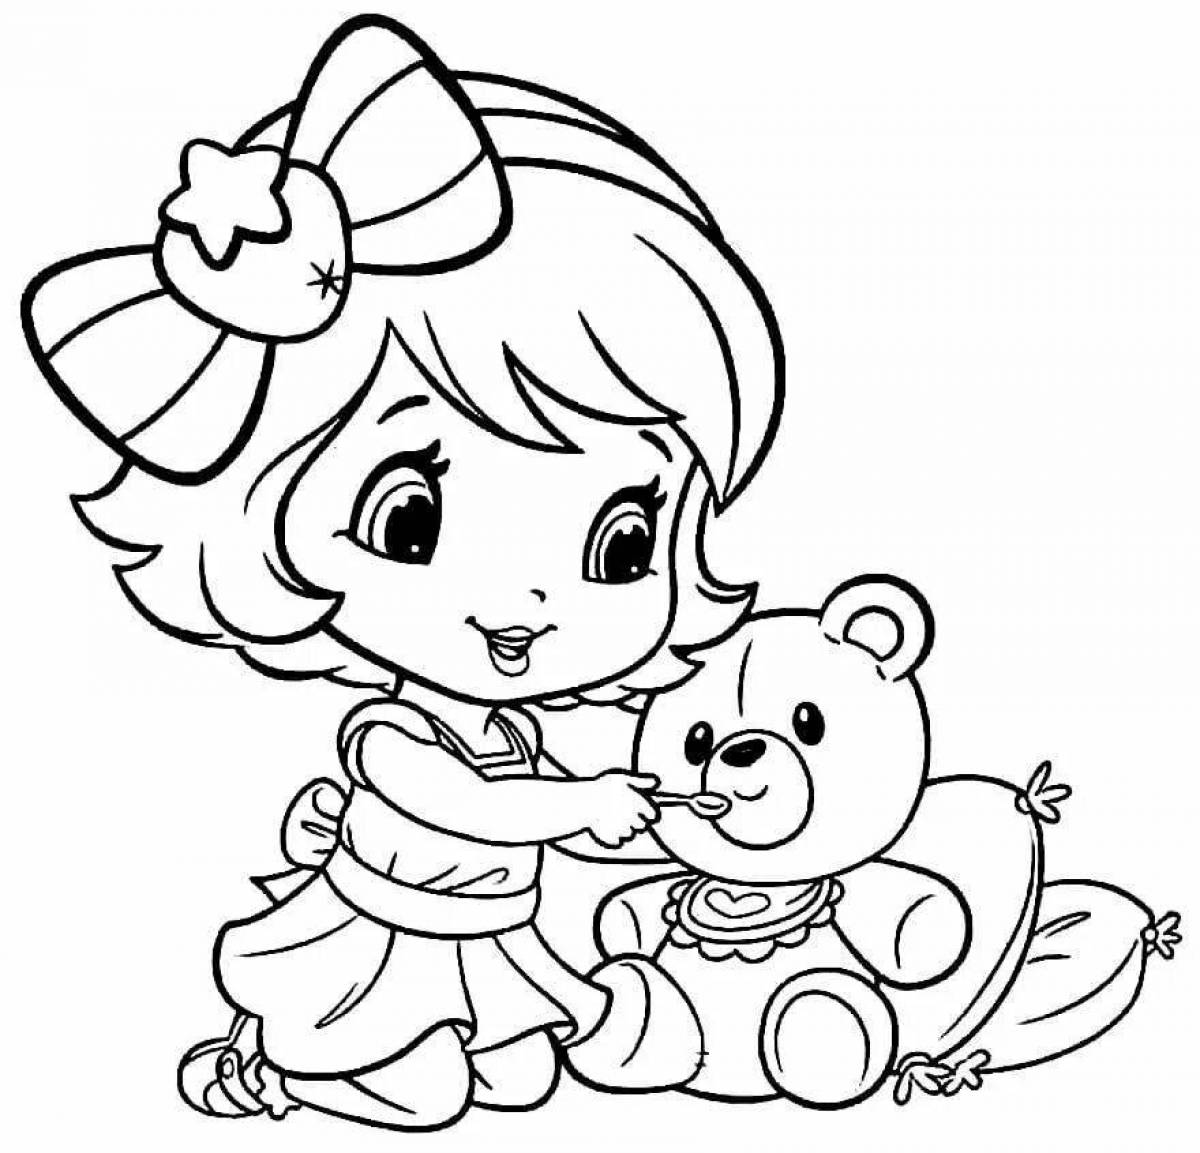 Sunshine coloring for baby